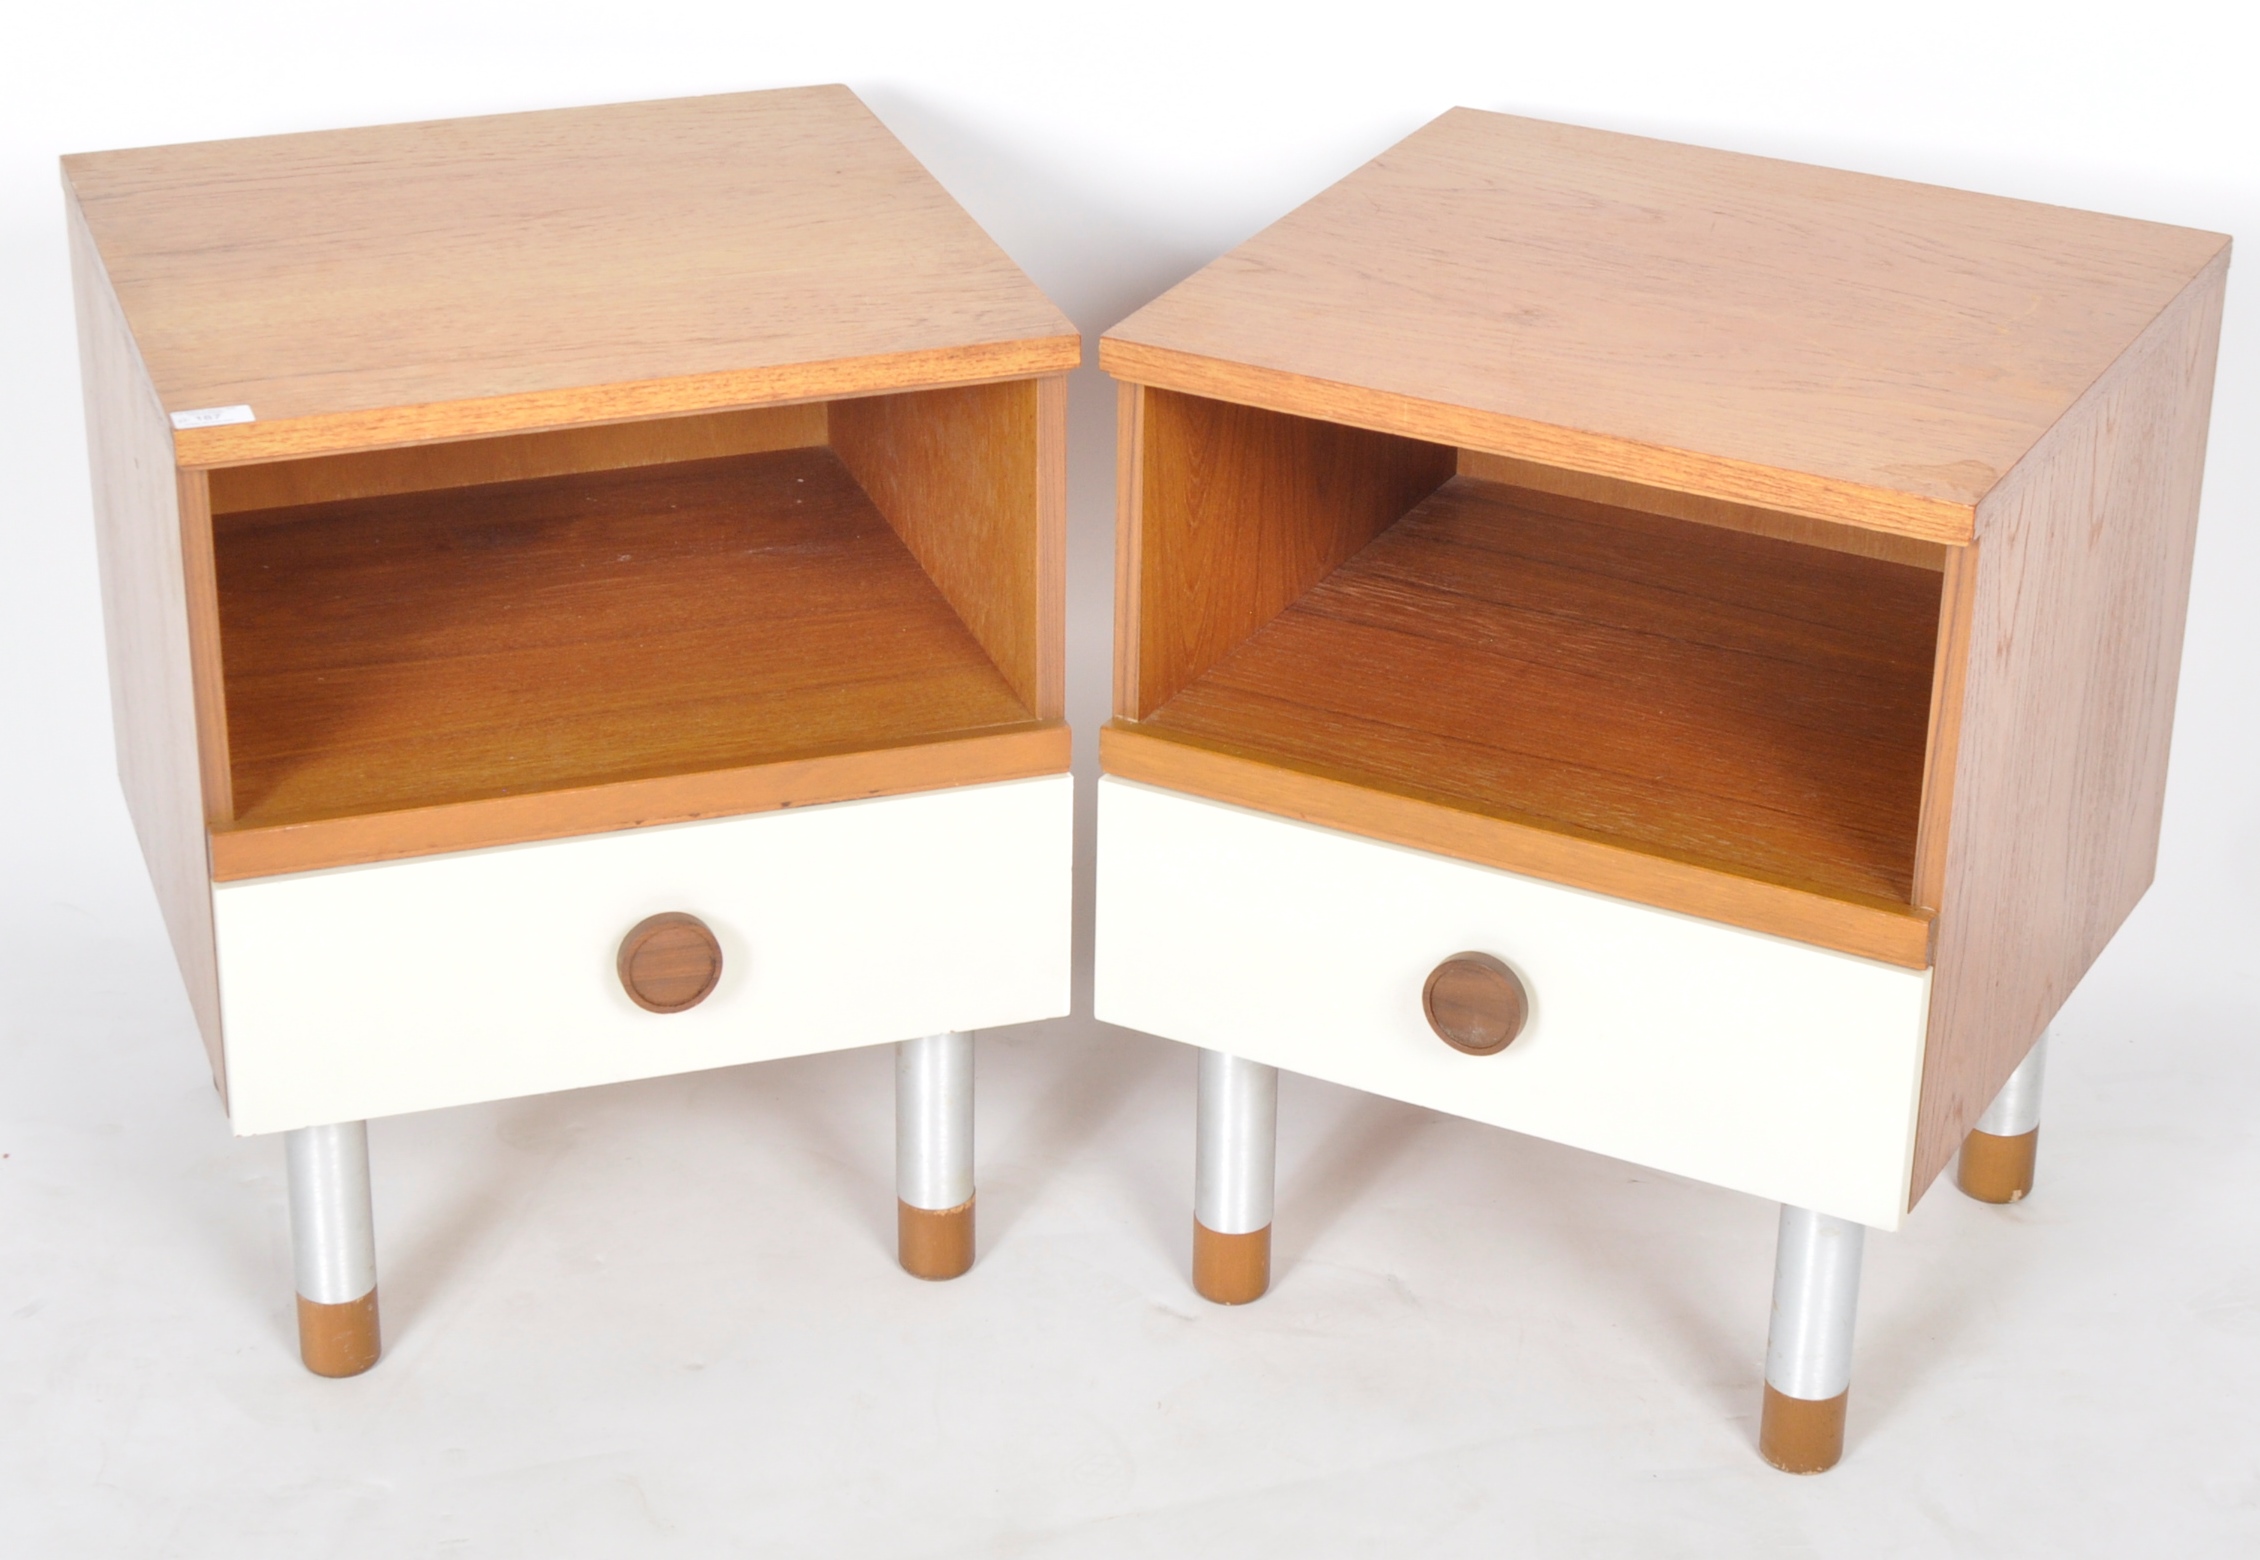 MATCHING PAIR OF RETRO BRITISH DESIGN BEDSIDE TABLES - Image 2 of 5